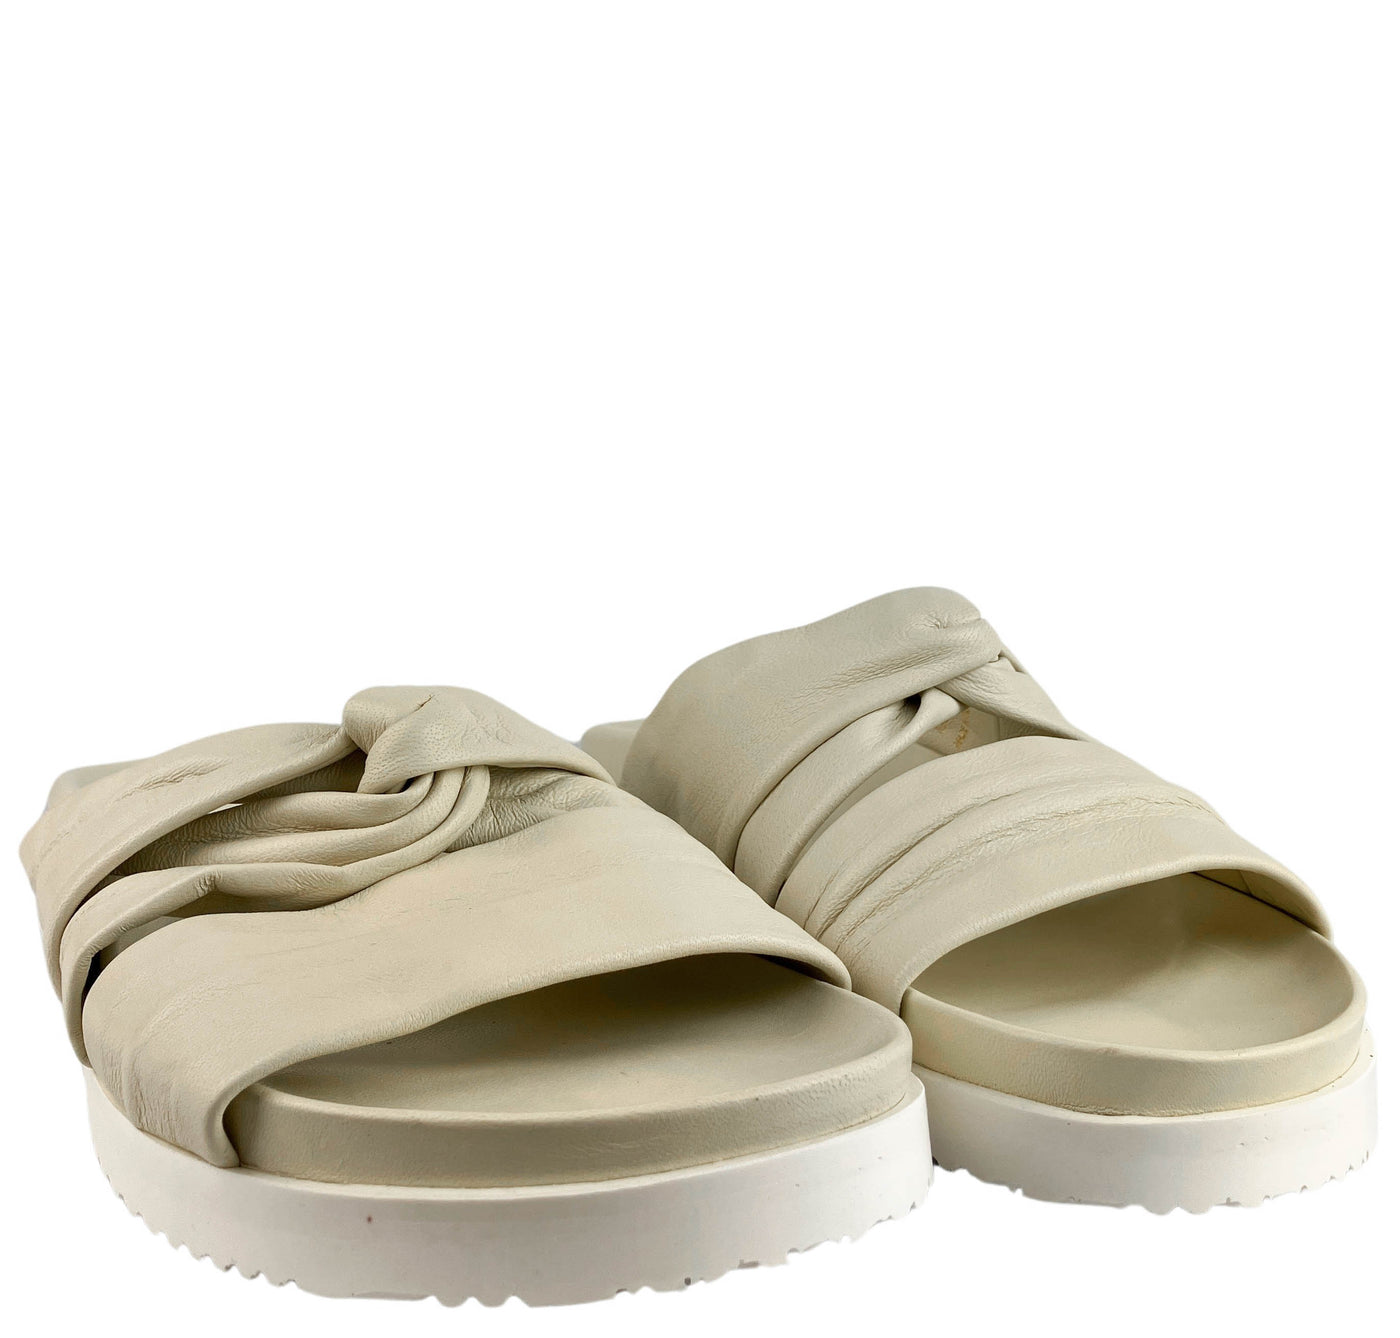 Phillip Lim Twisted Sandals in Vanilla - Discounts on Phillip Lim at UAL